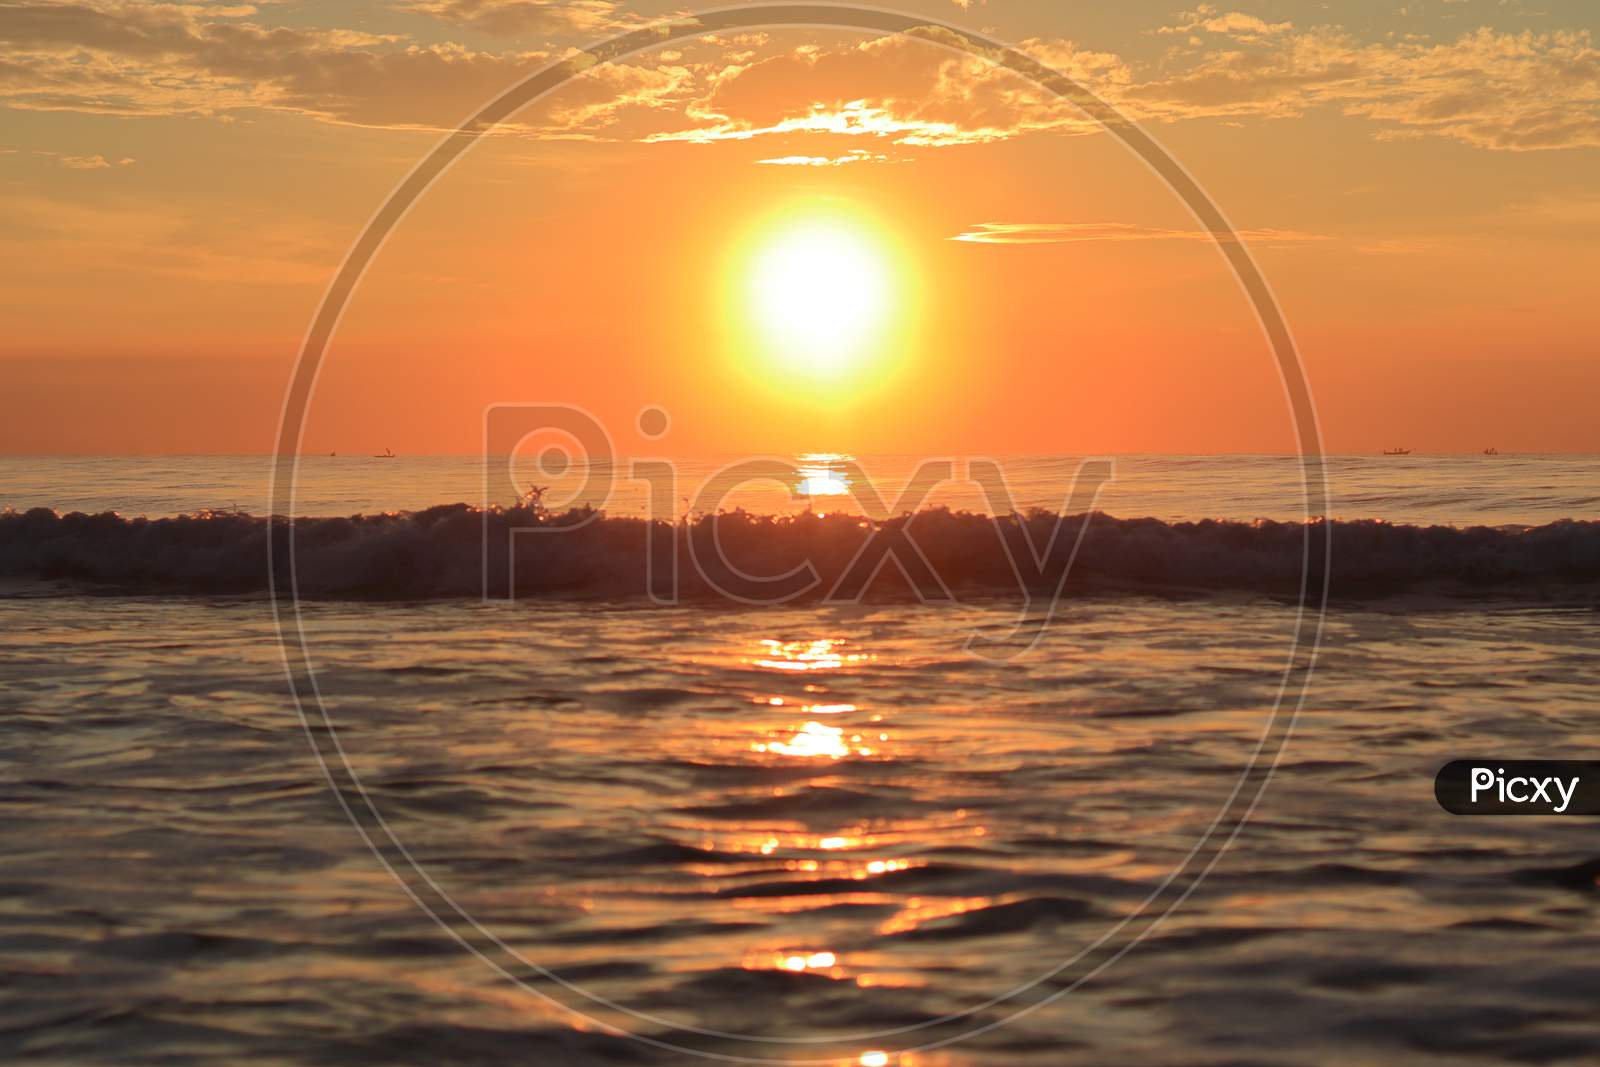 At Sunrise In The Morning, The Huge Bright Rays Of The Bright Sun Welcoming The Rising Waves Of The Huge Ocean